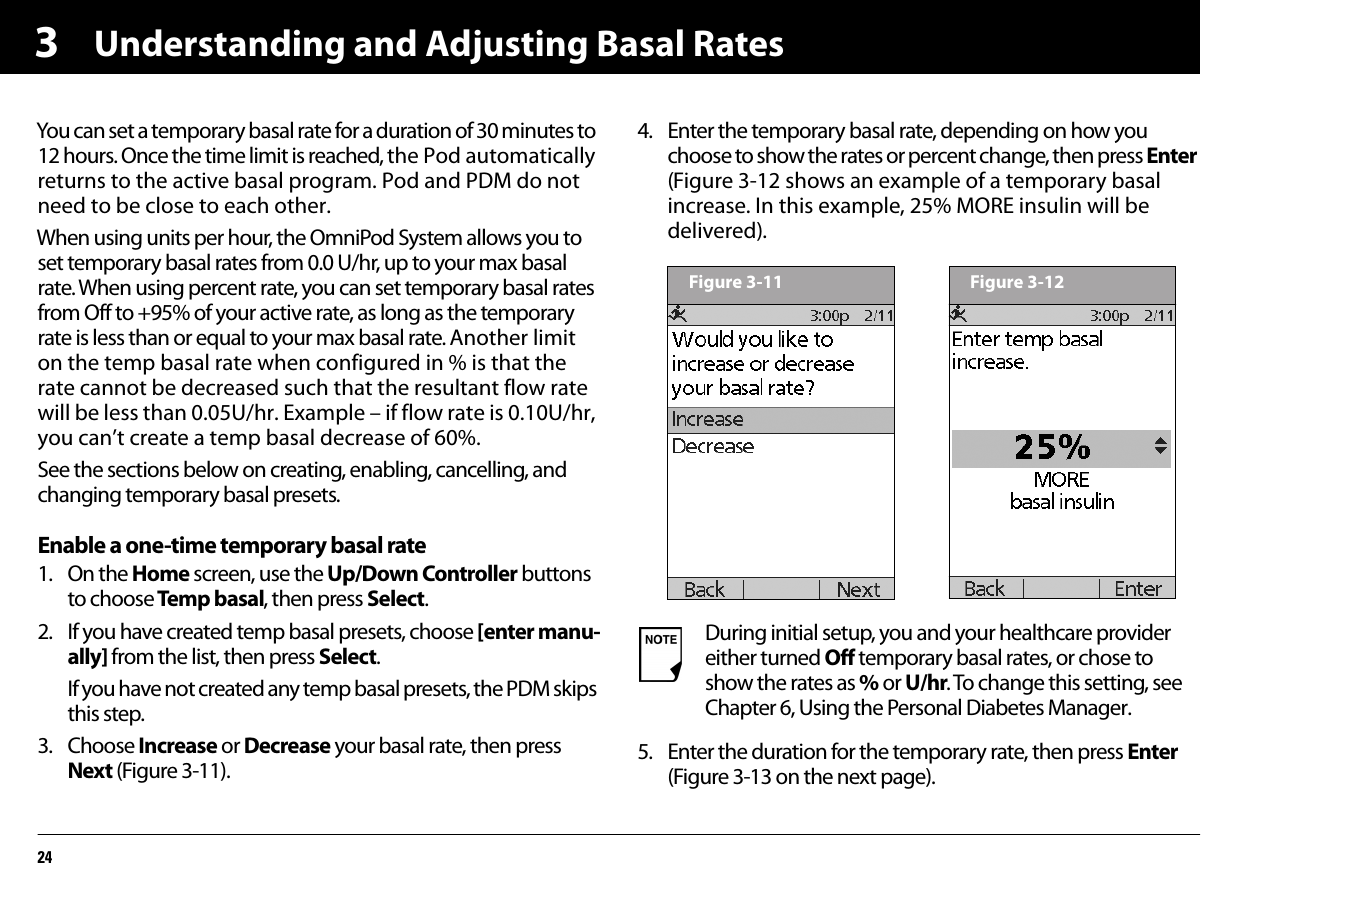 Understanding and Adjusting Basal Rates243You can set a temporary basal rate for a duration of 30 minutes to 12 hours. Once the time limit is reached, the Pod automatically returns to the active basal program. Pod and PDM do not need to be close to each other.When using units per hour, the OmniPod System allows you to set temporary basal rates from 0.0 U/hr, up to your max basal rate. When using percent rate, you can set temporary basal rates from Off to +95% of your active rate, as long as the temporary rate is less than or equal to your max basal rate. Another limit on the temp basal rate when configured in % is that the rate cannot be decreased such that the resultant flow rate will be less than 0.05U/hr. Example – if flow rate is 0.10U/hr, you can’t create a temp basal decrease of 60%.See the sections below on creating, enabling, cancelling, and changing temporary basal presets.Enable a one-time temporary basal rate1. On the Home screen, use the Up/Down Controller buttons to choose Temp basal, then press Select.2. If you have created temp basal presets, choose [enter manu-ally] from the list, then press Select.If you have not created any temp basal presets, the PDM skips this step.3. Choose Increase or Decrease your basal rate, then press Next (Figure 3-11).4. Enter the temporary basal rate, depending on how you choose to show the rates or percent change, then press Enter (Figure 3-12 shows an example of a temporary basal increase. In this example, 25% MORE insulin will be delivered). 5. Enter the duration for the temporary rate, then press Enter (Figure 3-13 on the next page).During initial setup, you and your healthcare provider either turned Off temporary basal rates, or chose to show the rates as % or U/hr. To change this setting, see Chapter 6, Using the Personal Diabetes Manager.Figure 3-11 Figure 3-12